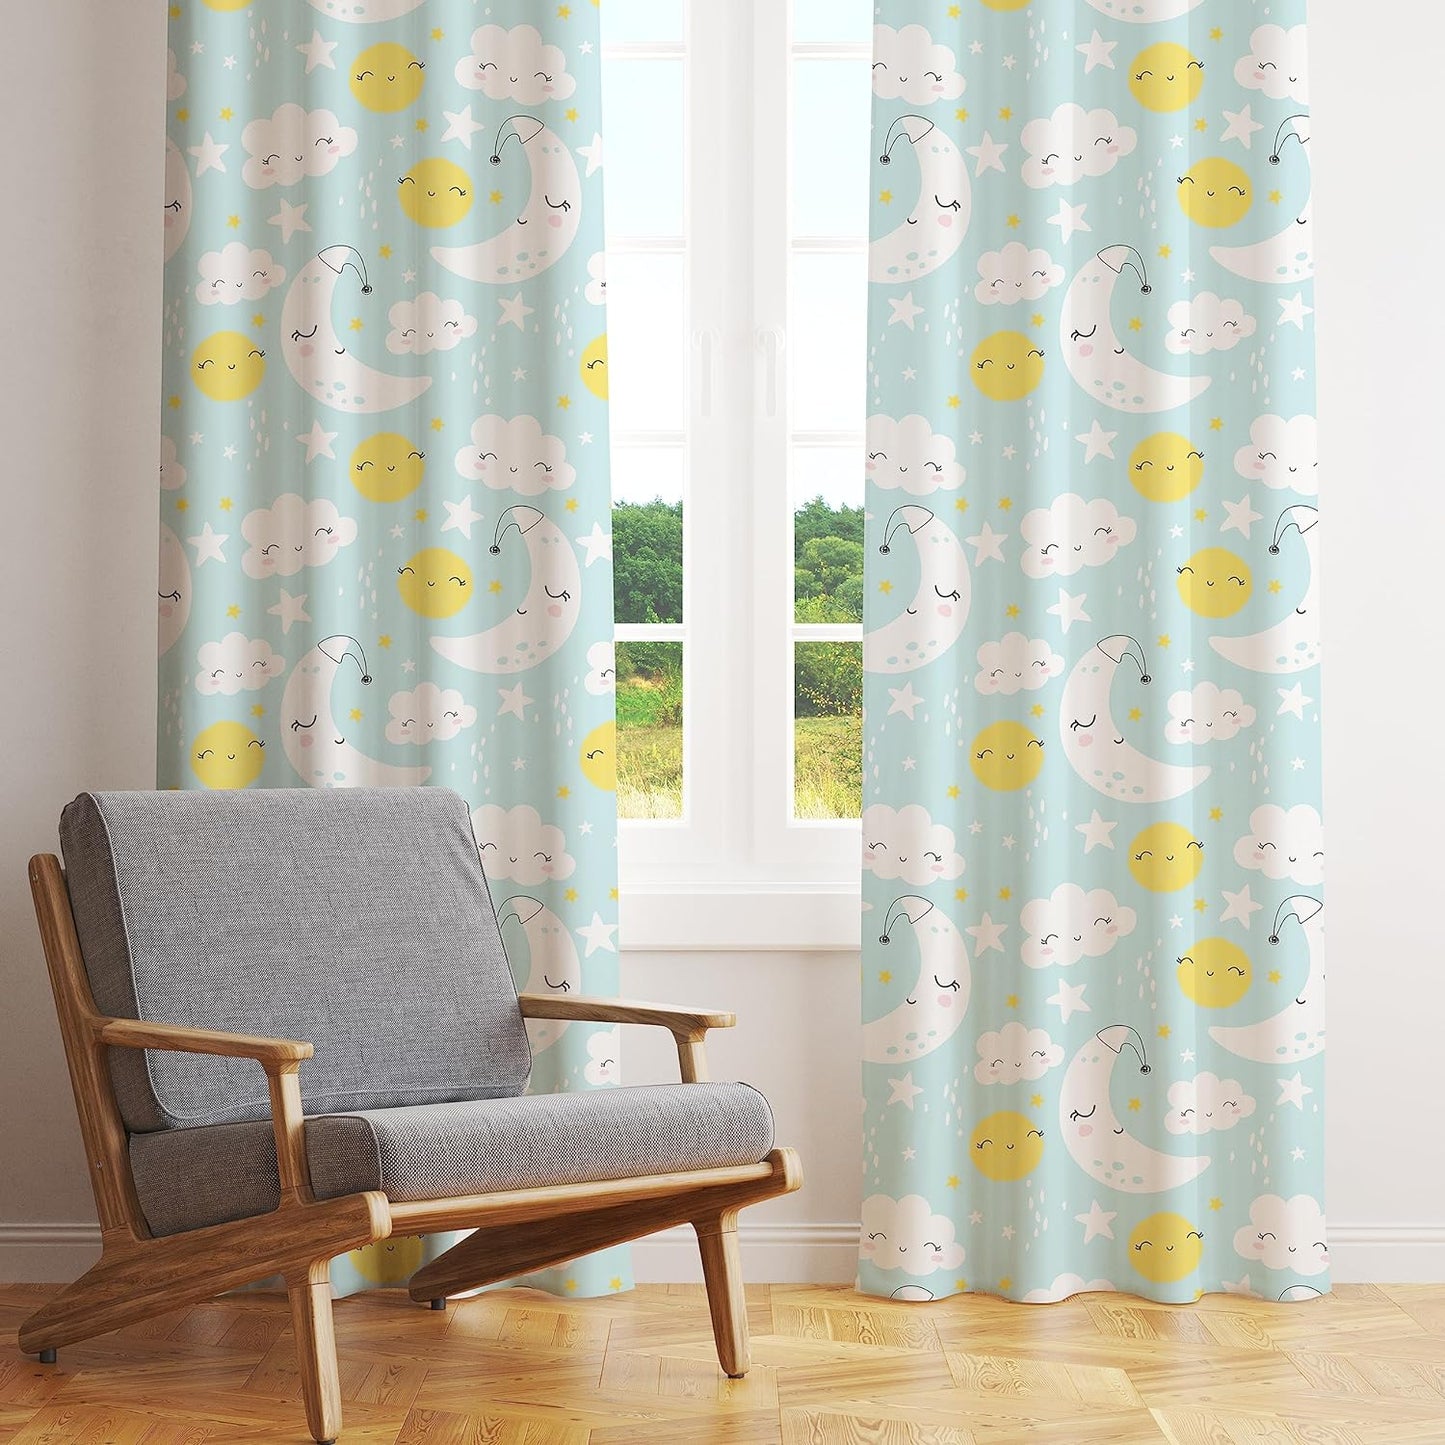  Blue and yellow curtain with cartoon sun, moon, and clouds design.